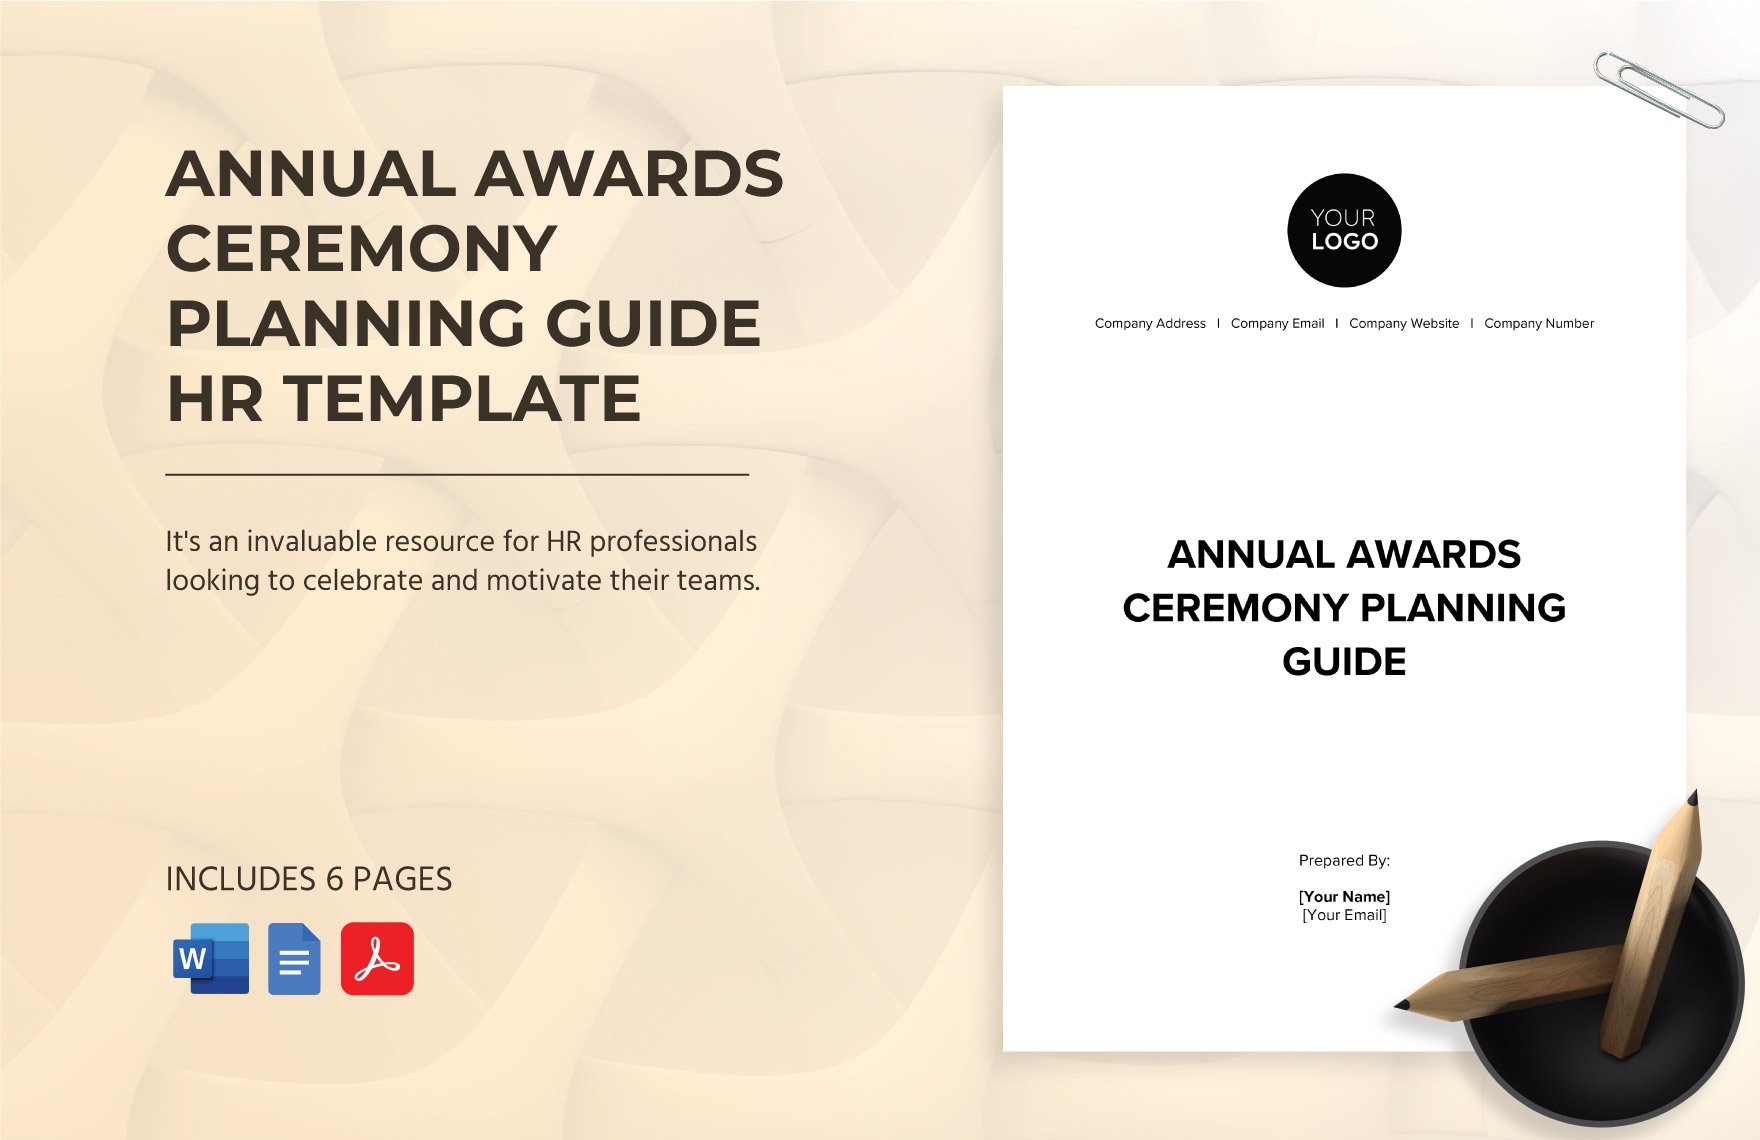 Annual Awards Ceremony Planning Guide HR Template